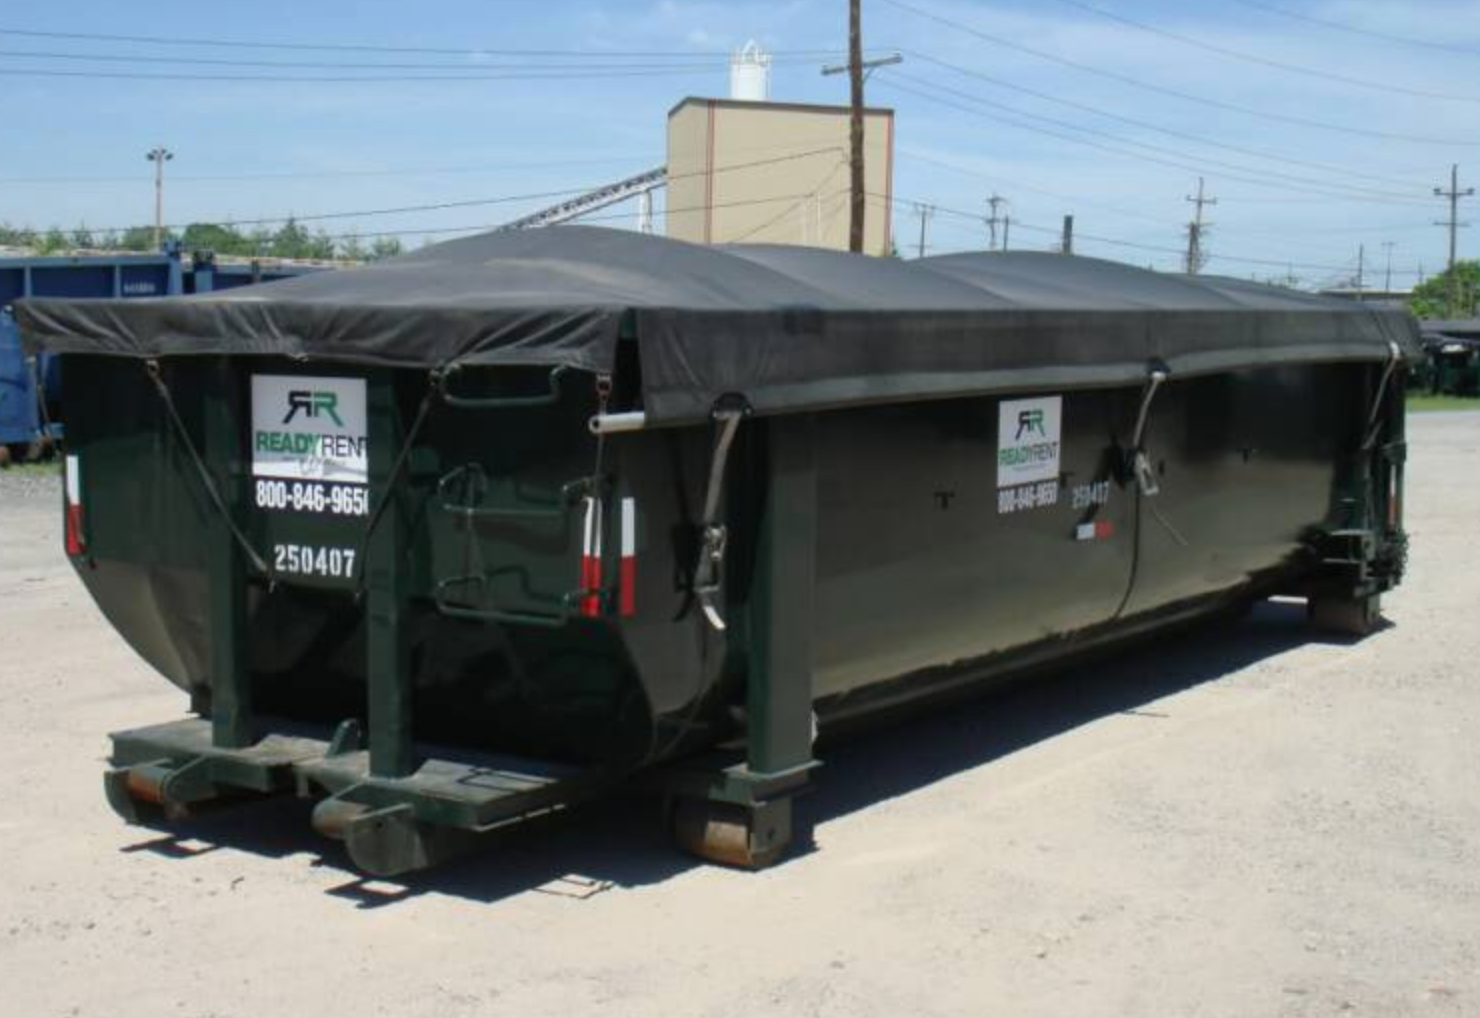 Dumpster Covers, Hand Thrown Tarps Style in Black